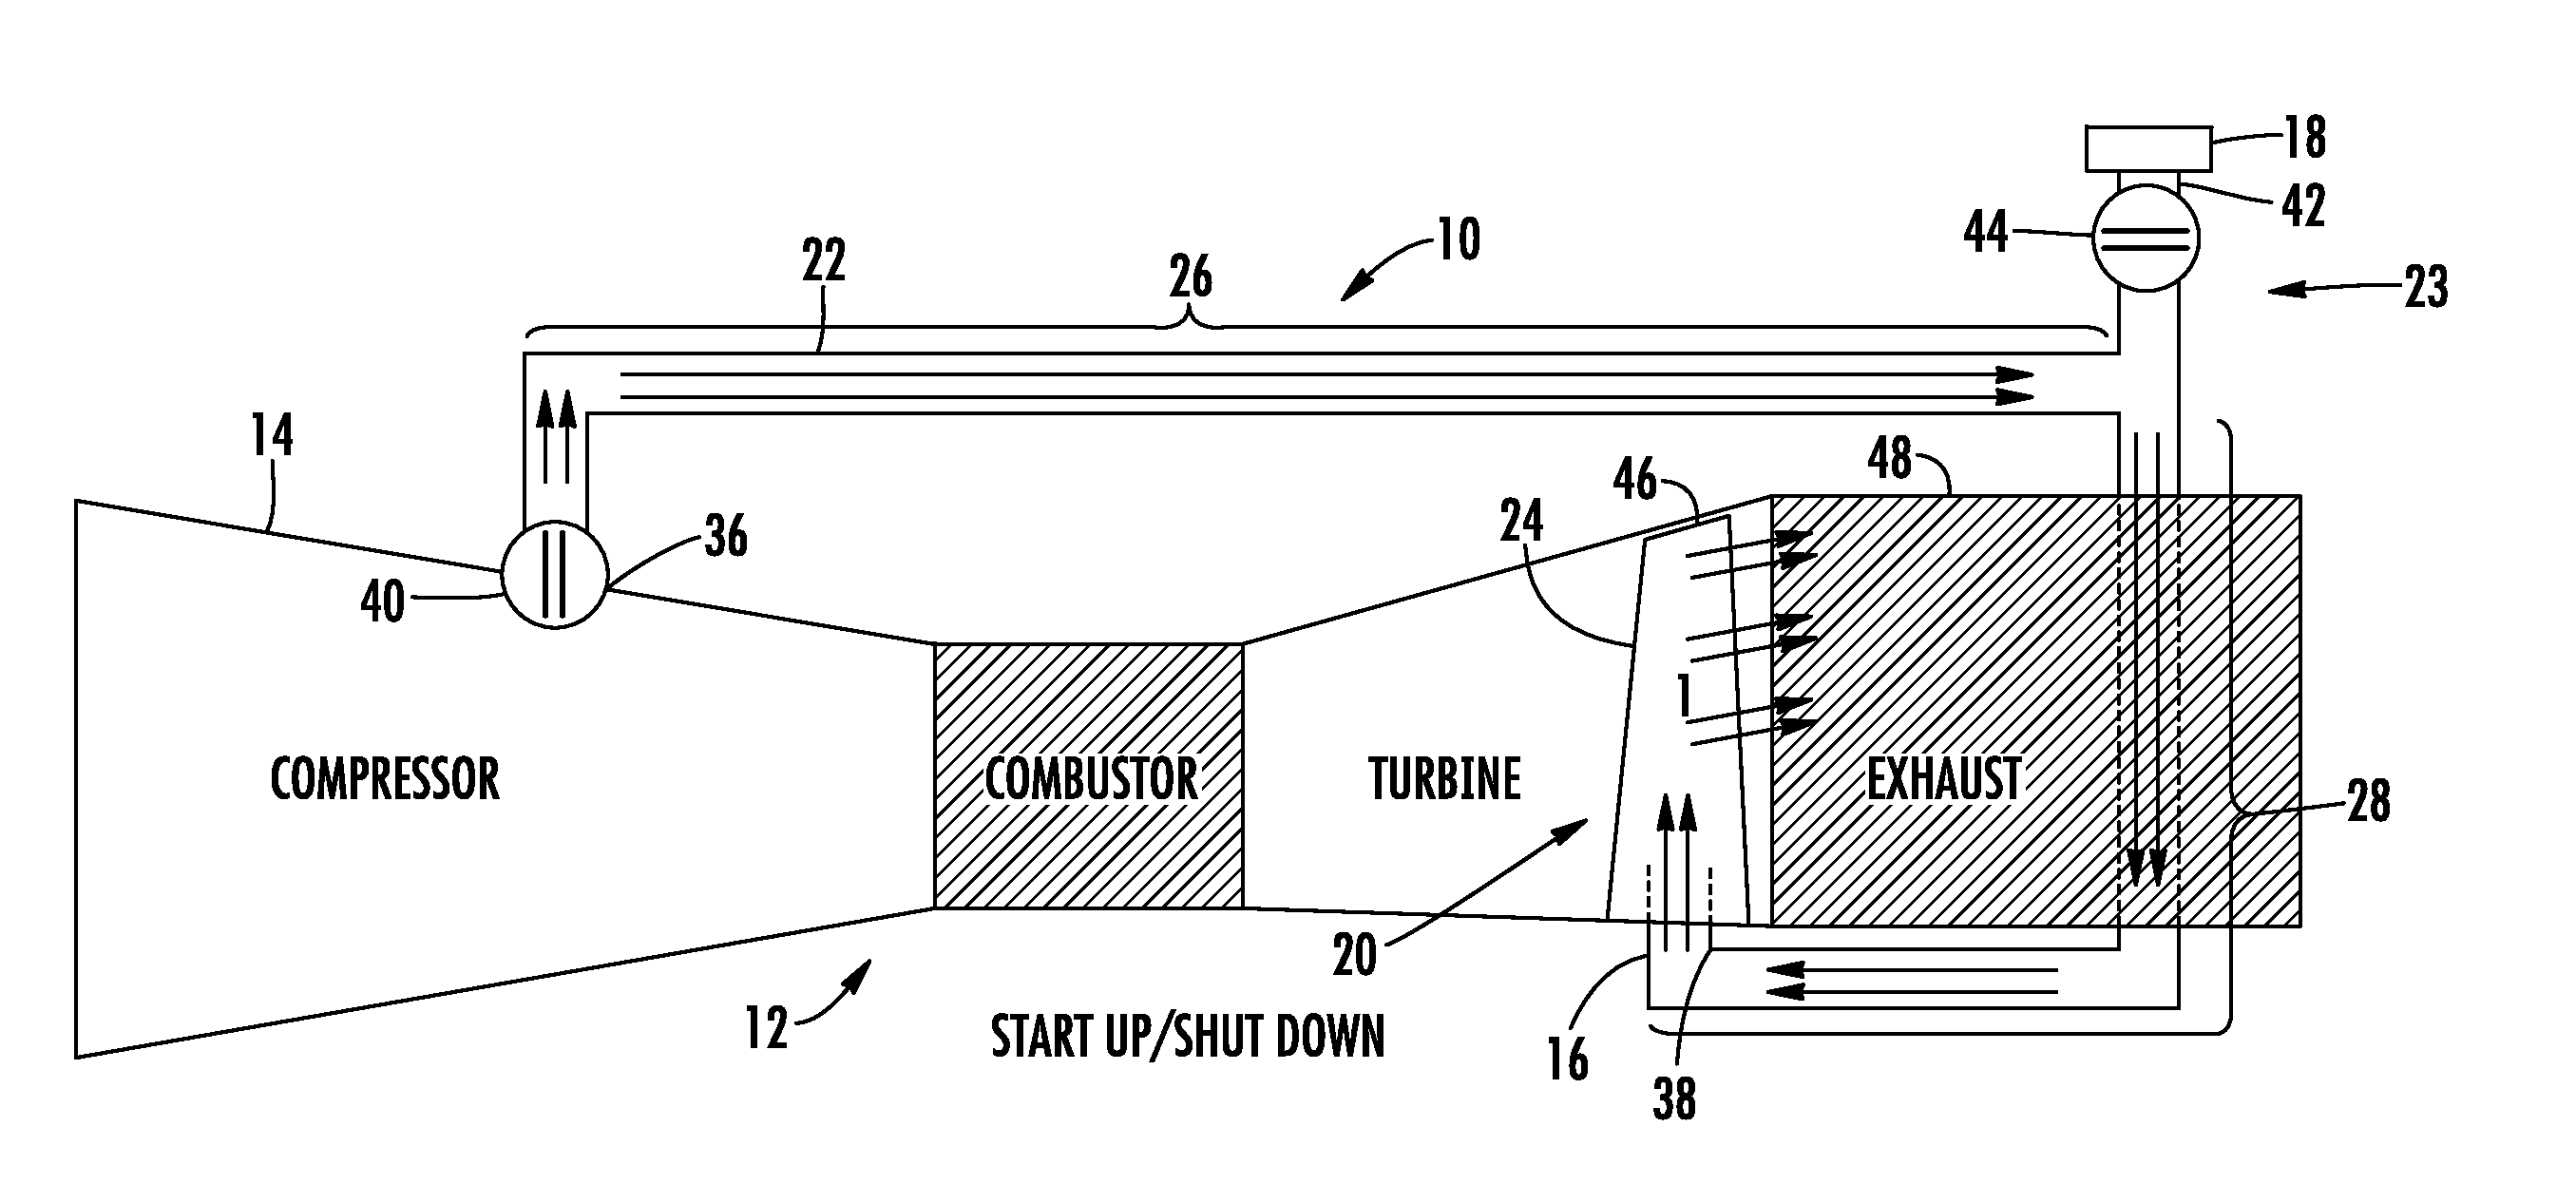 Cooling system with compressor bleed and ambient air for gas turbine engine